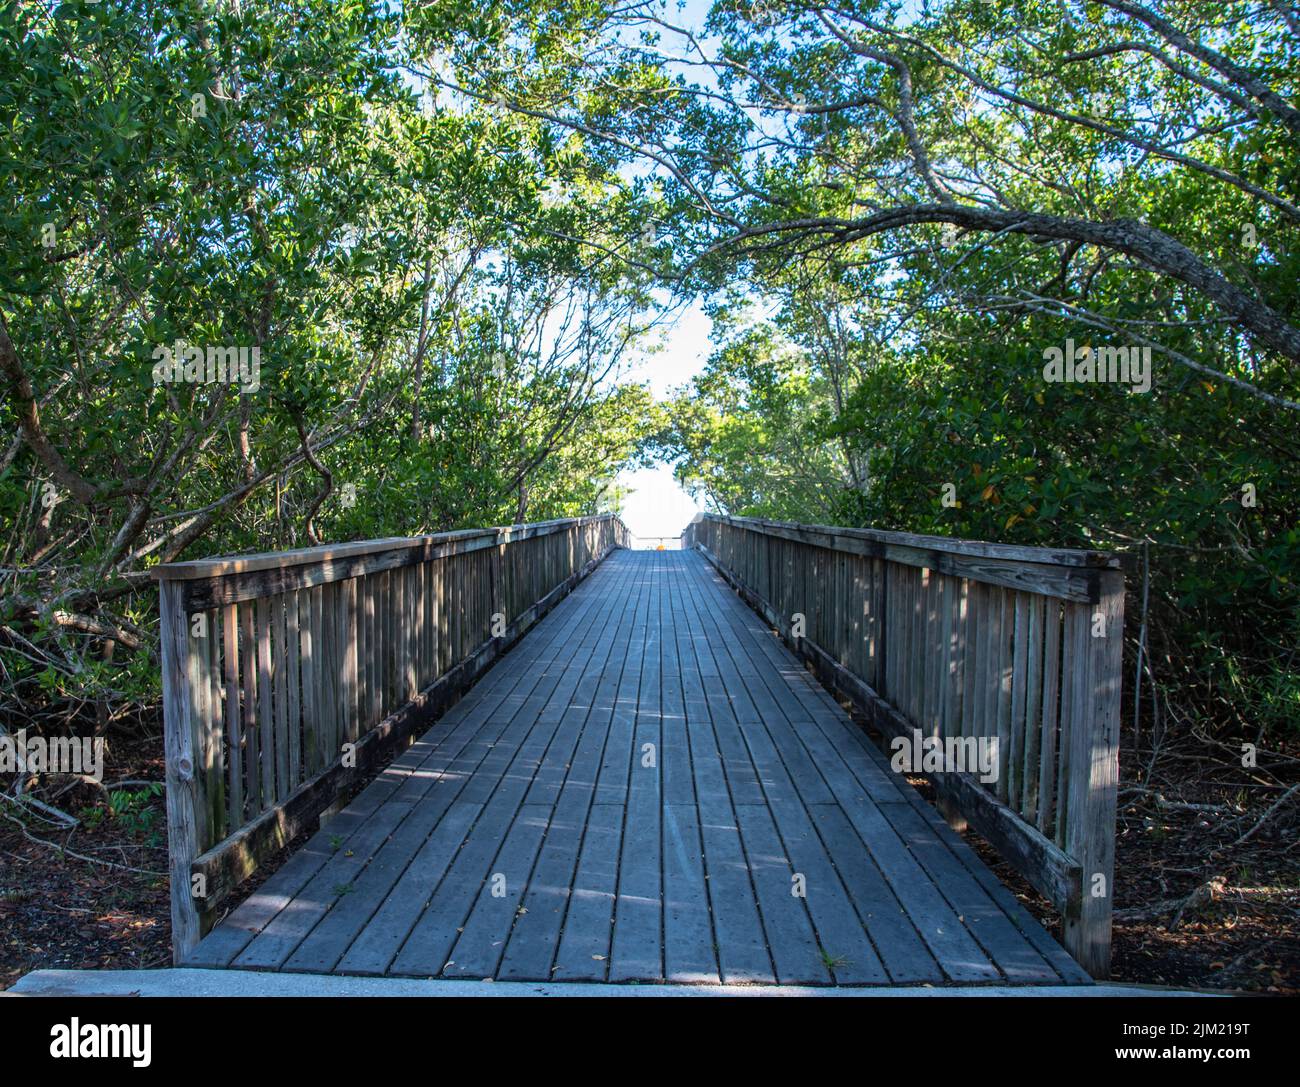 Wooden walkway bridge leading to the River with a canopy of mangove trees bent over the path giving protective shade in the summer day. Punta Gorda, F Stock Photo